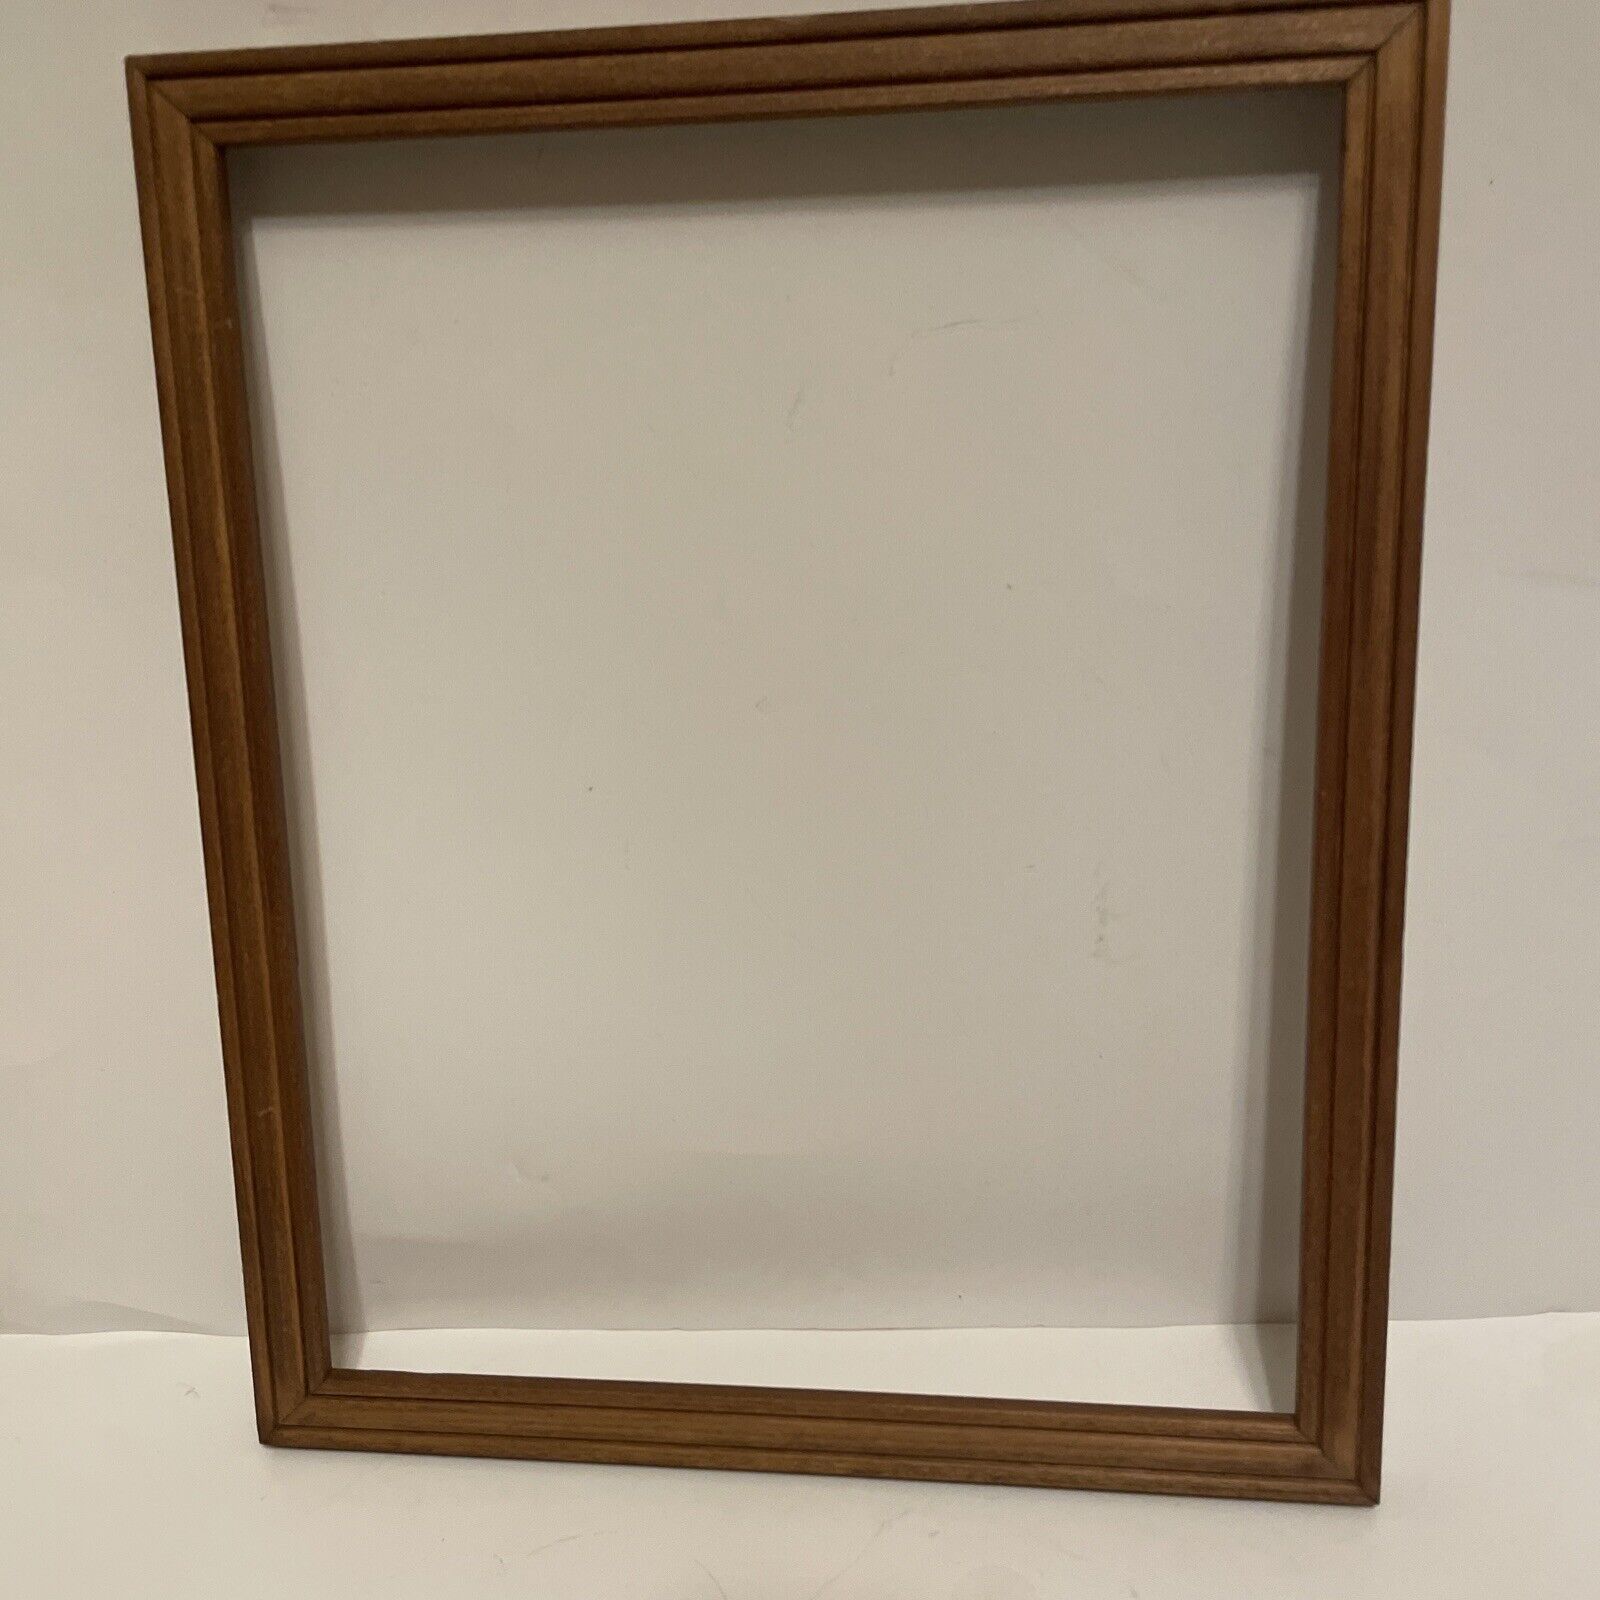 Wood Frame With Liner 17.5x 14.5 Fits 15”x13” EUC